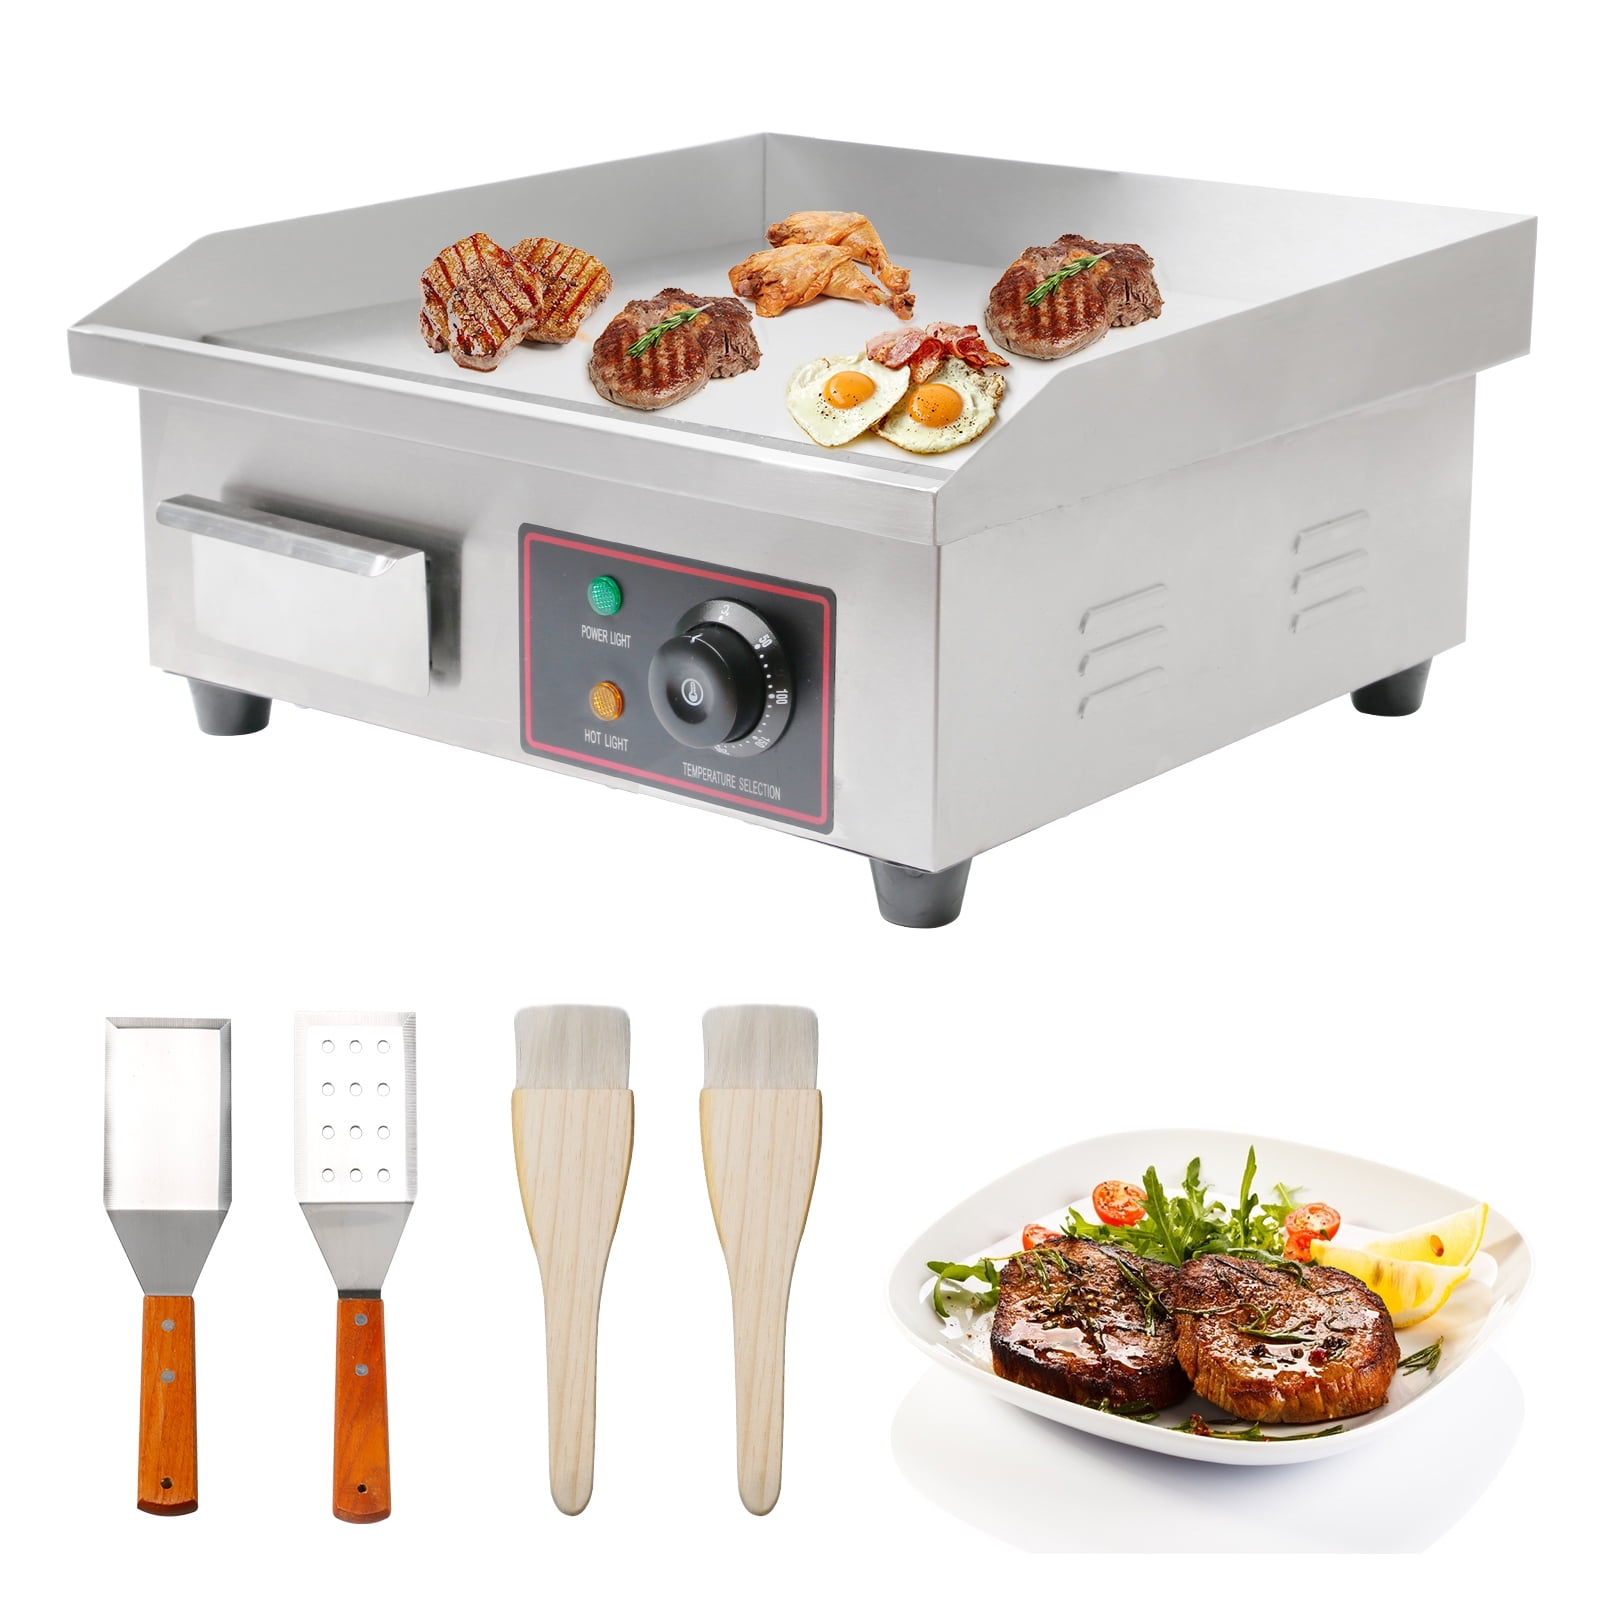 110V 3000W Non-Stick Commercial Restaurant Teppanyaki Grill Stainless Steel Restaurant Grill Adjustable Temperature Control 50°C-300°C 30 Electric Countertop Flat Top Griddle 